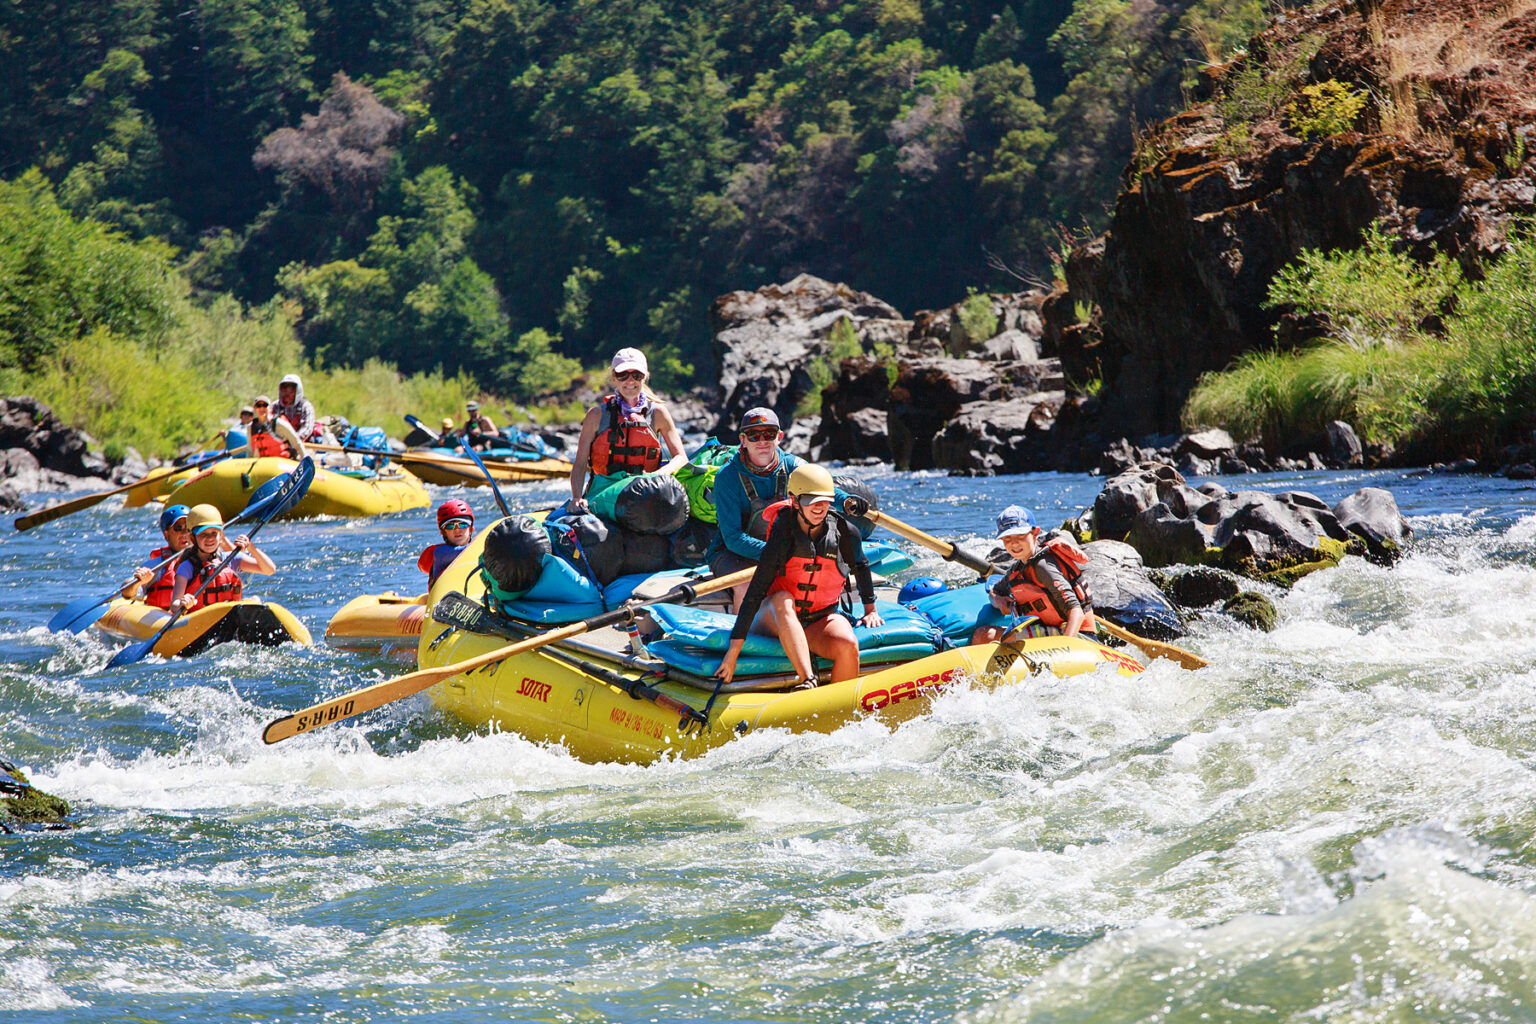 Oar rafts and inflatable kayaks tackle rapids on a family adventure down Oregon's Rogue River with OARS